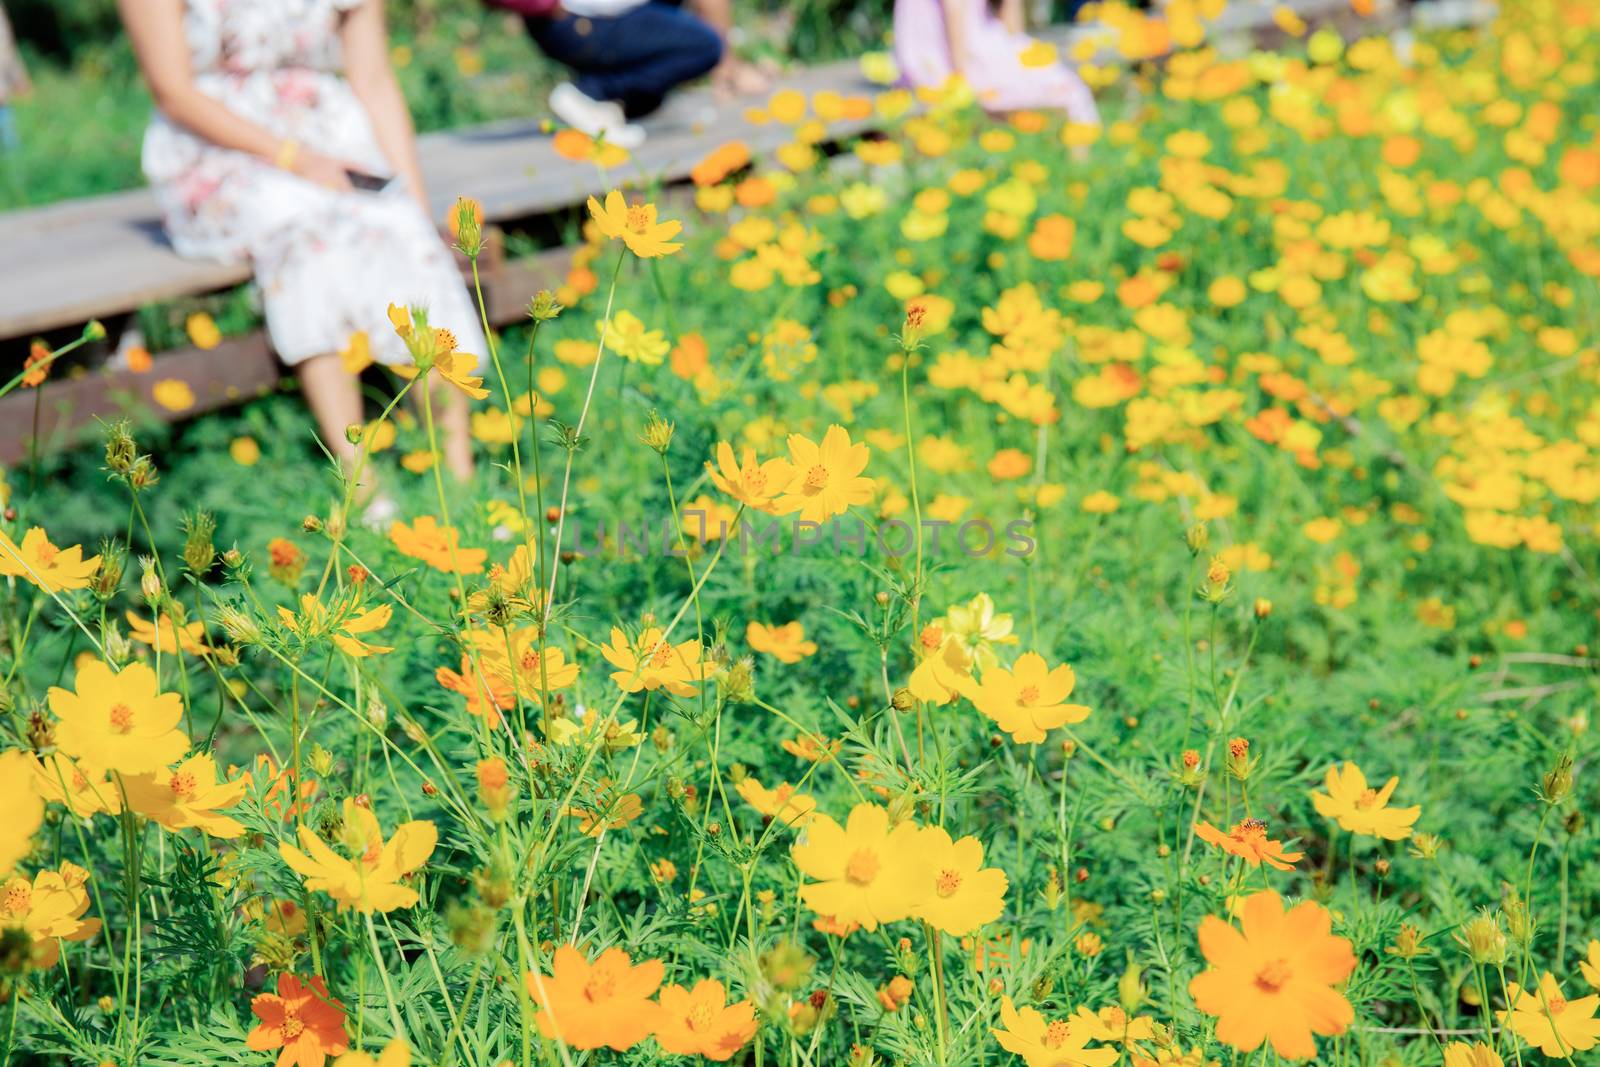 Yellow cosmos and girl in garden with sunlight.